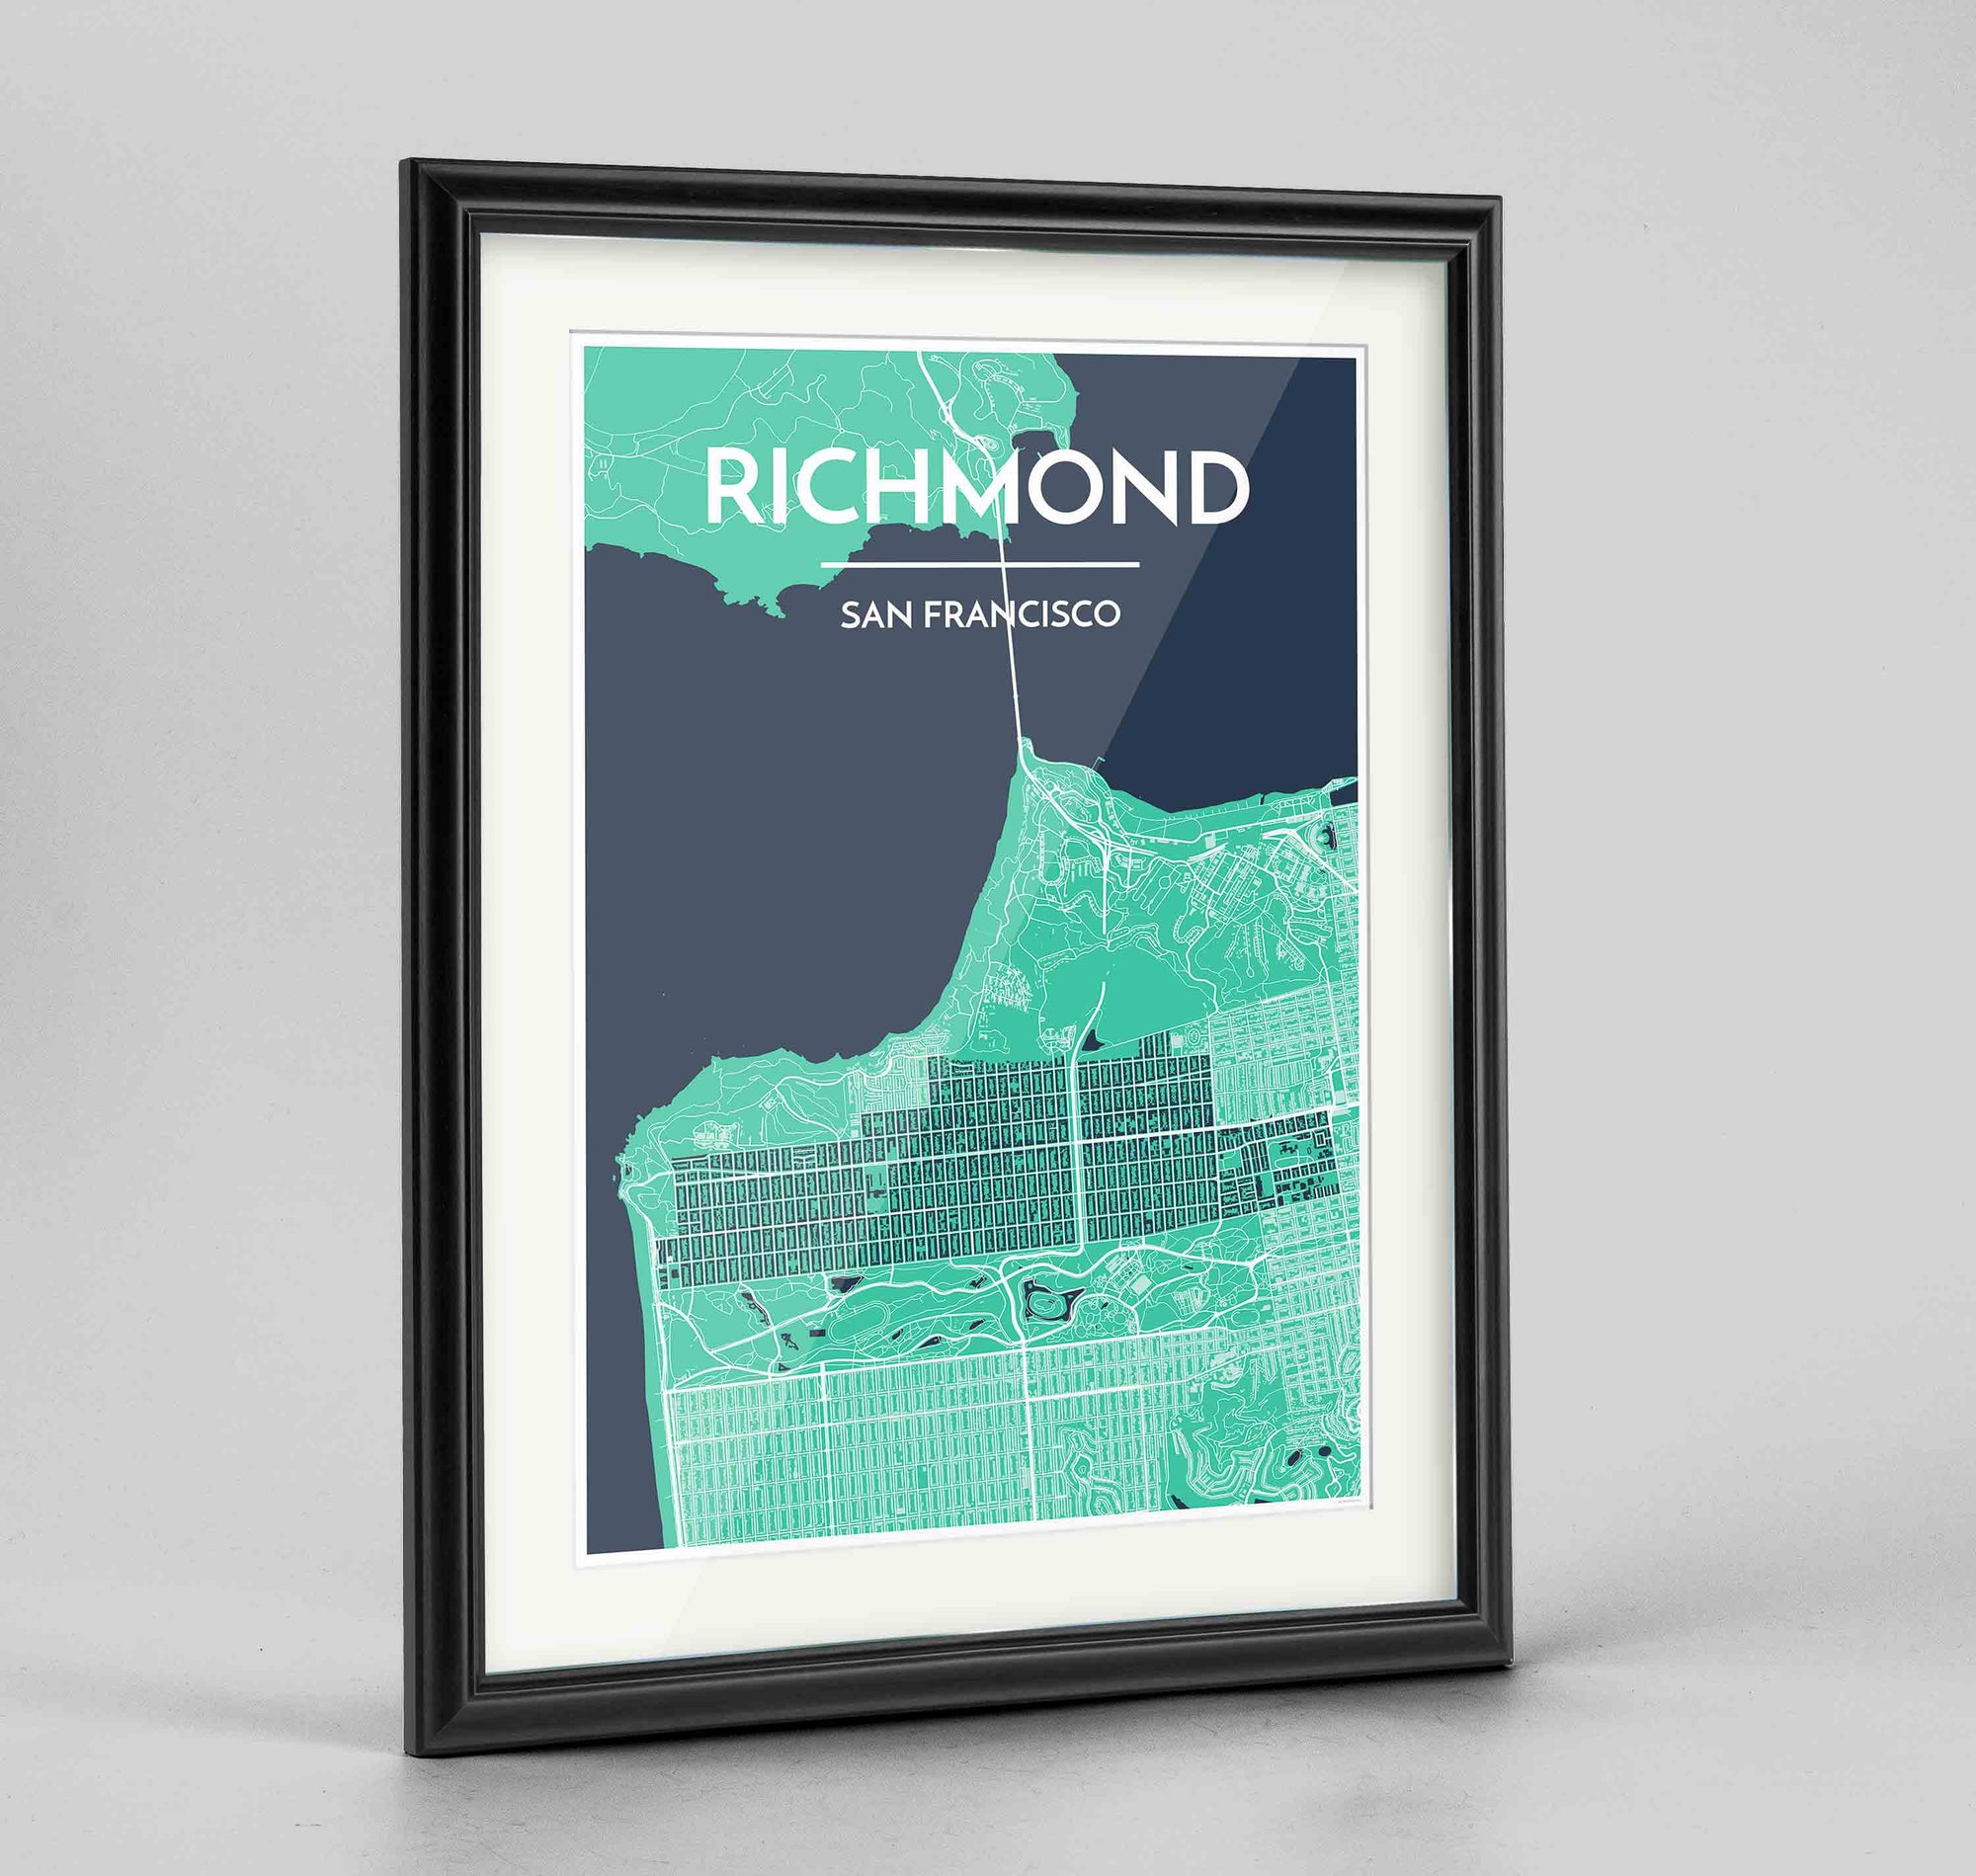 Framed The Richmond District San Francisco Map Art Print 24x36" Traditional Black frame Point Two Design Group